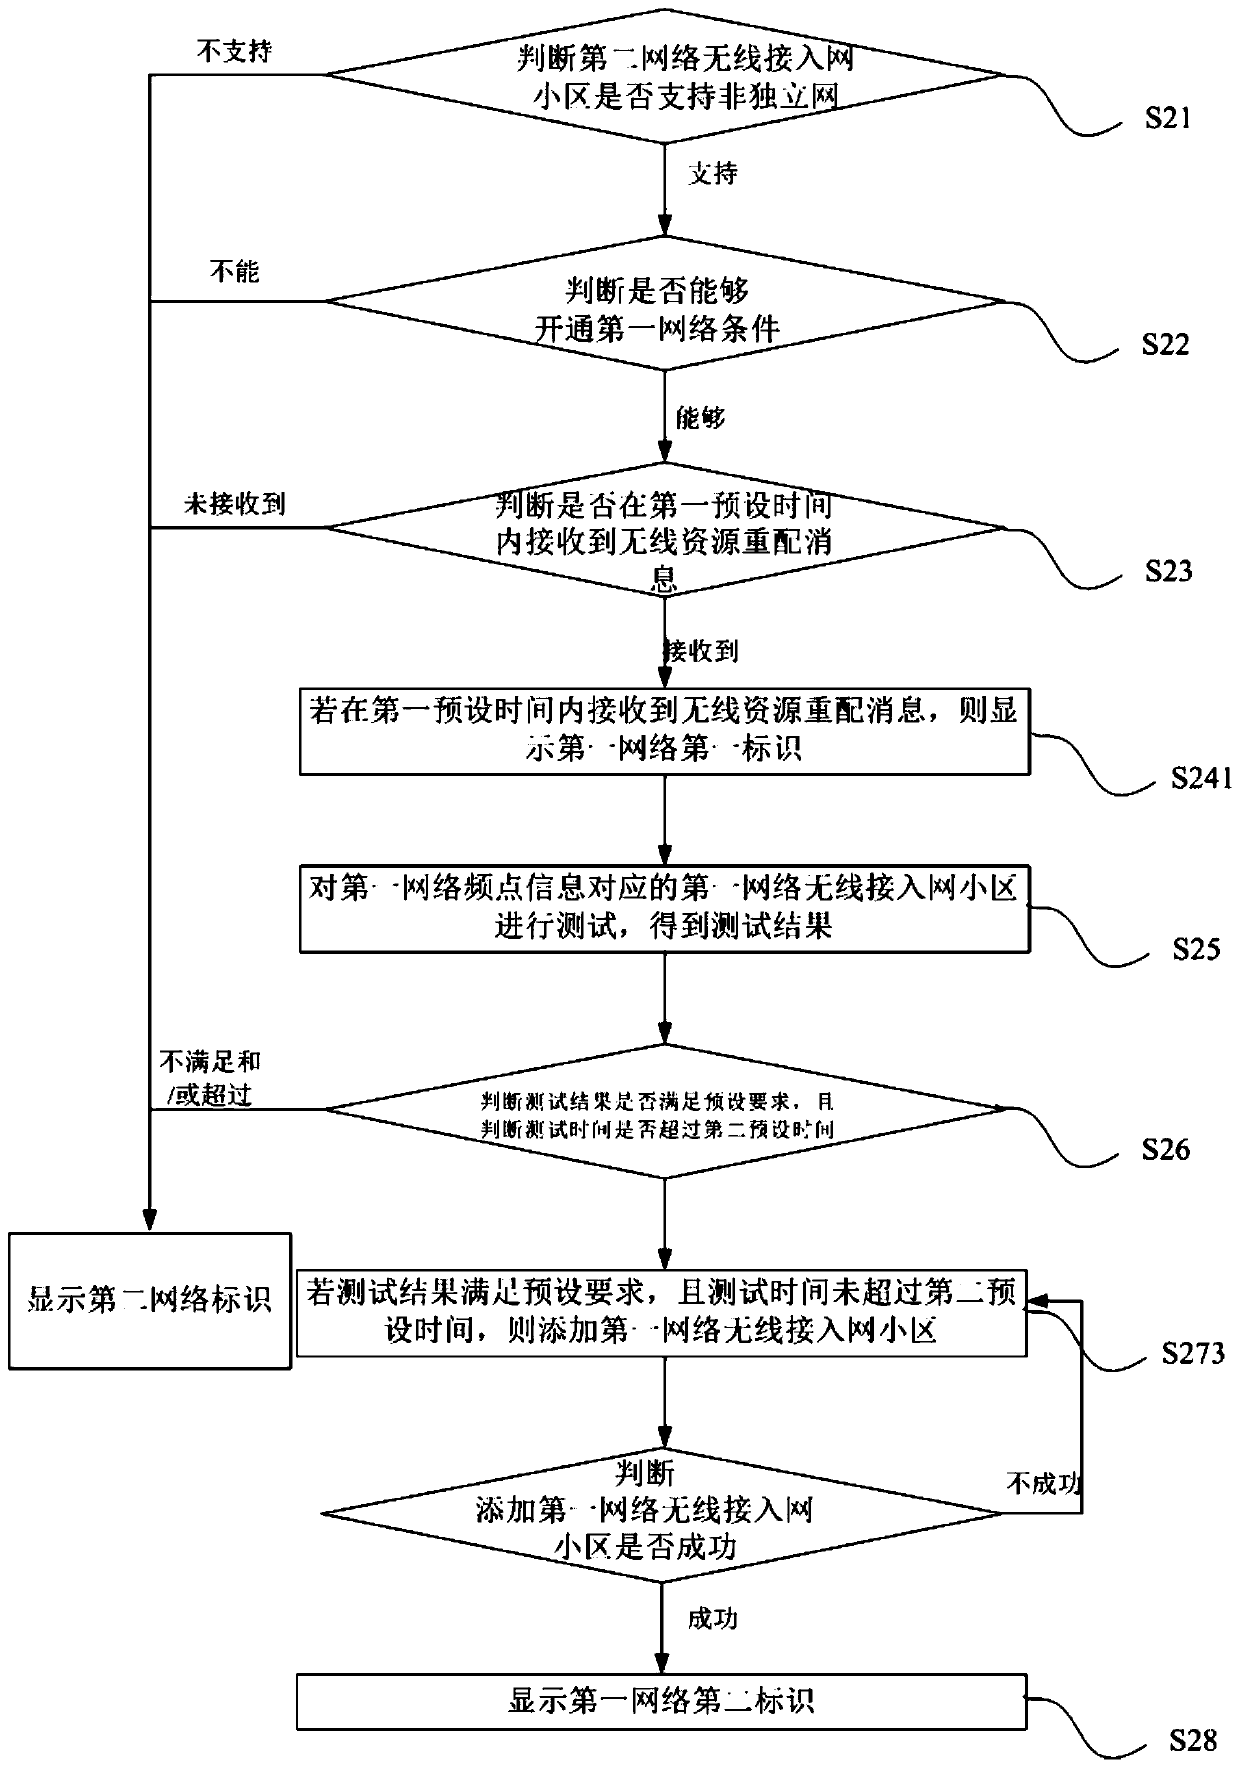 Networking identifier display method and device